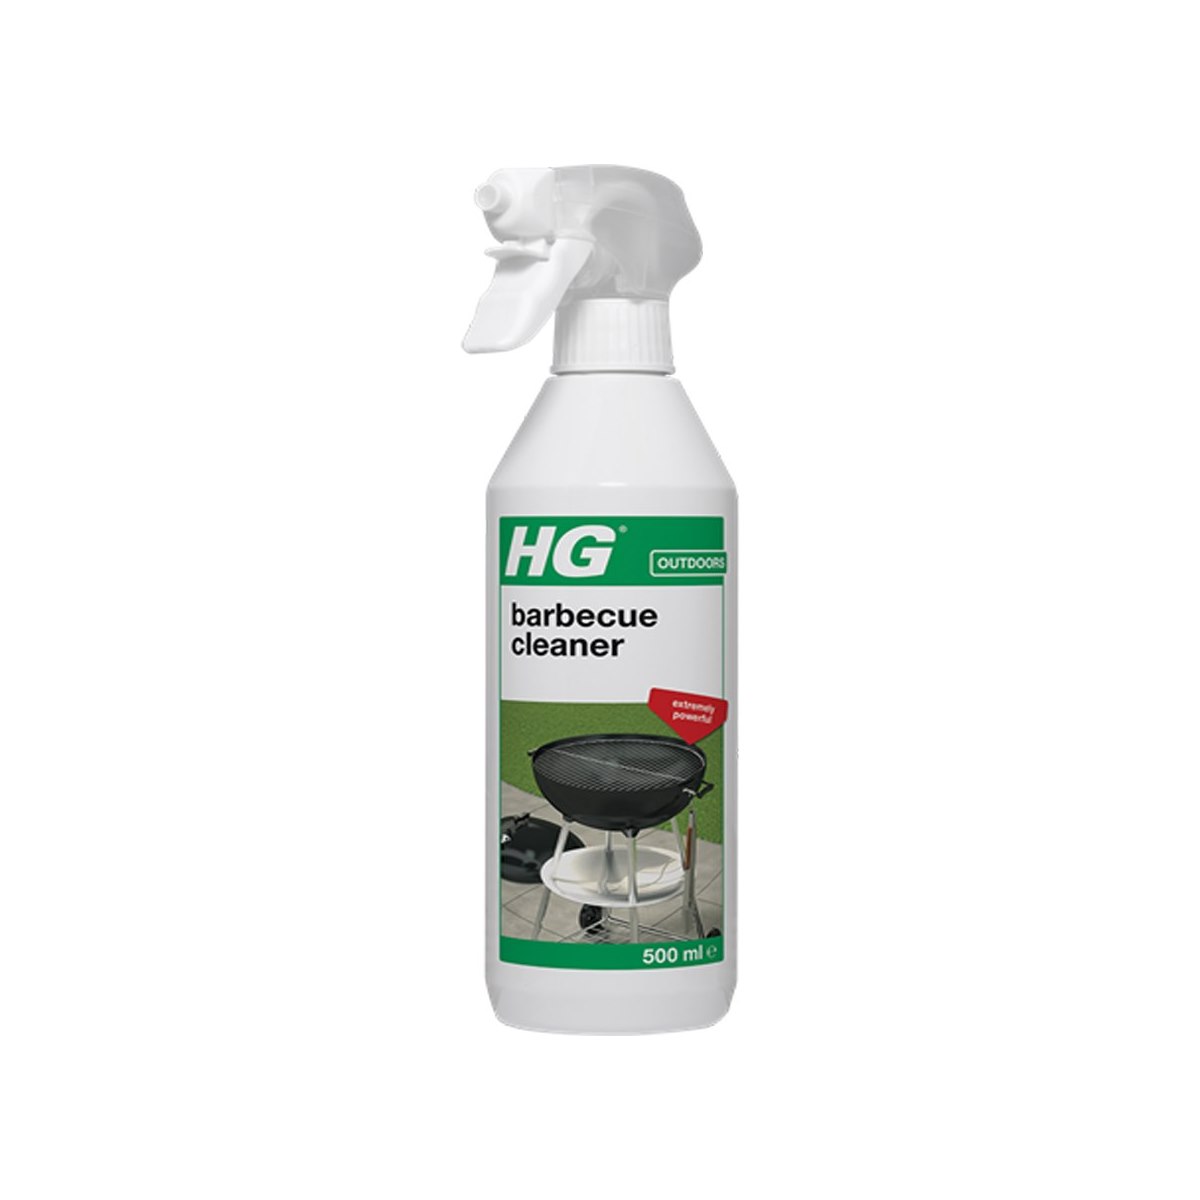 HG Barbecue Cleaner Spray 500ml